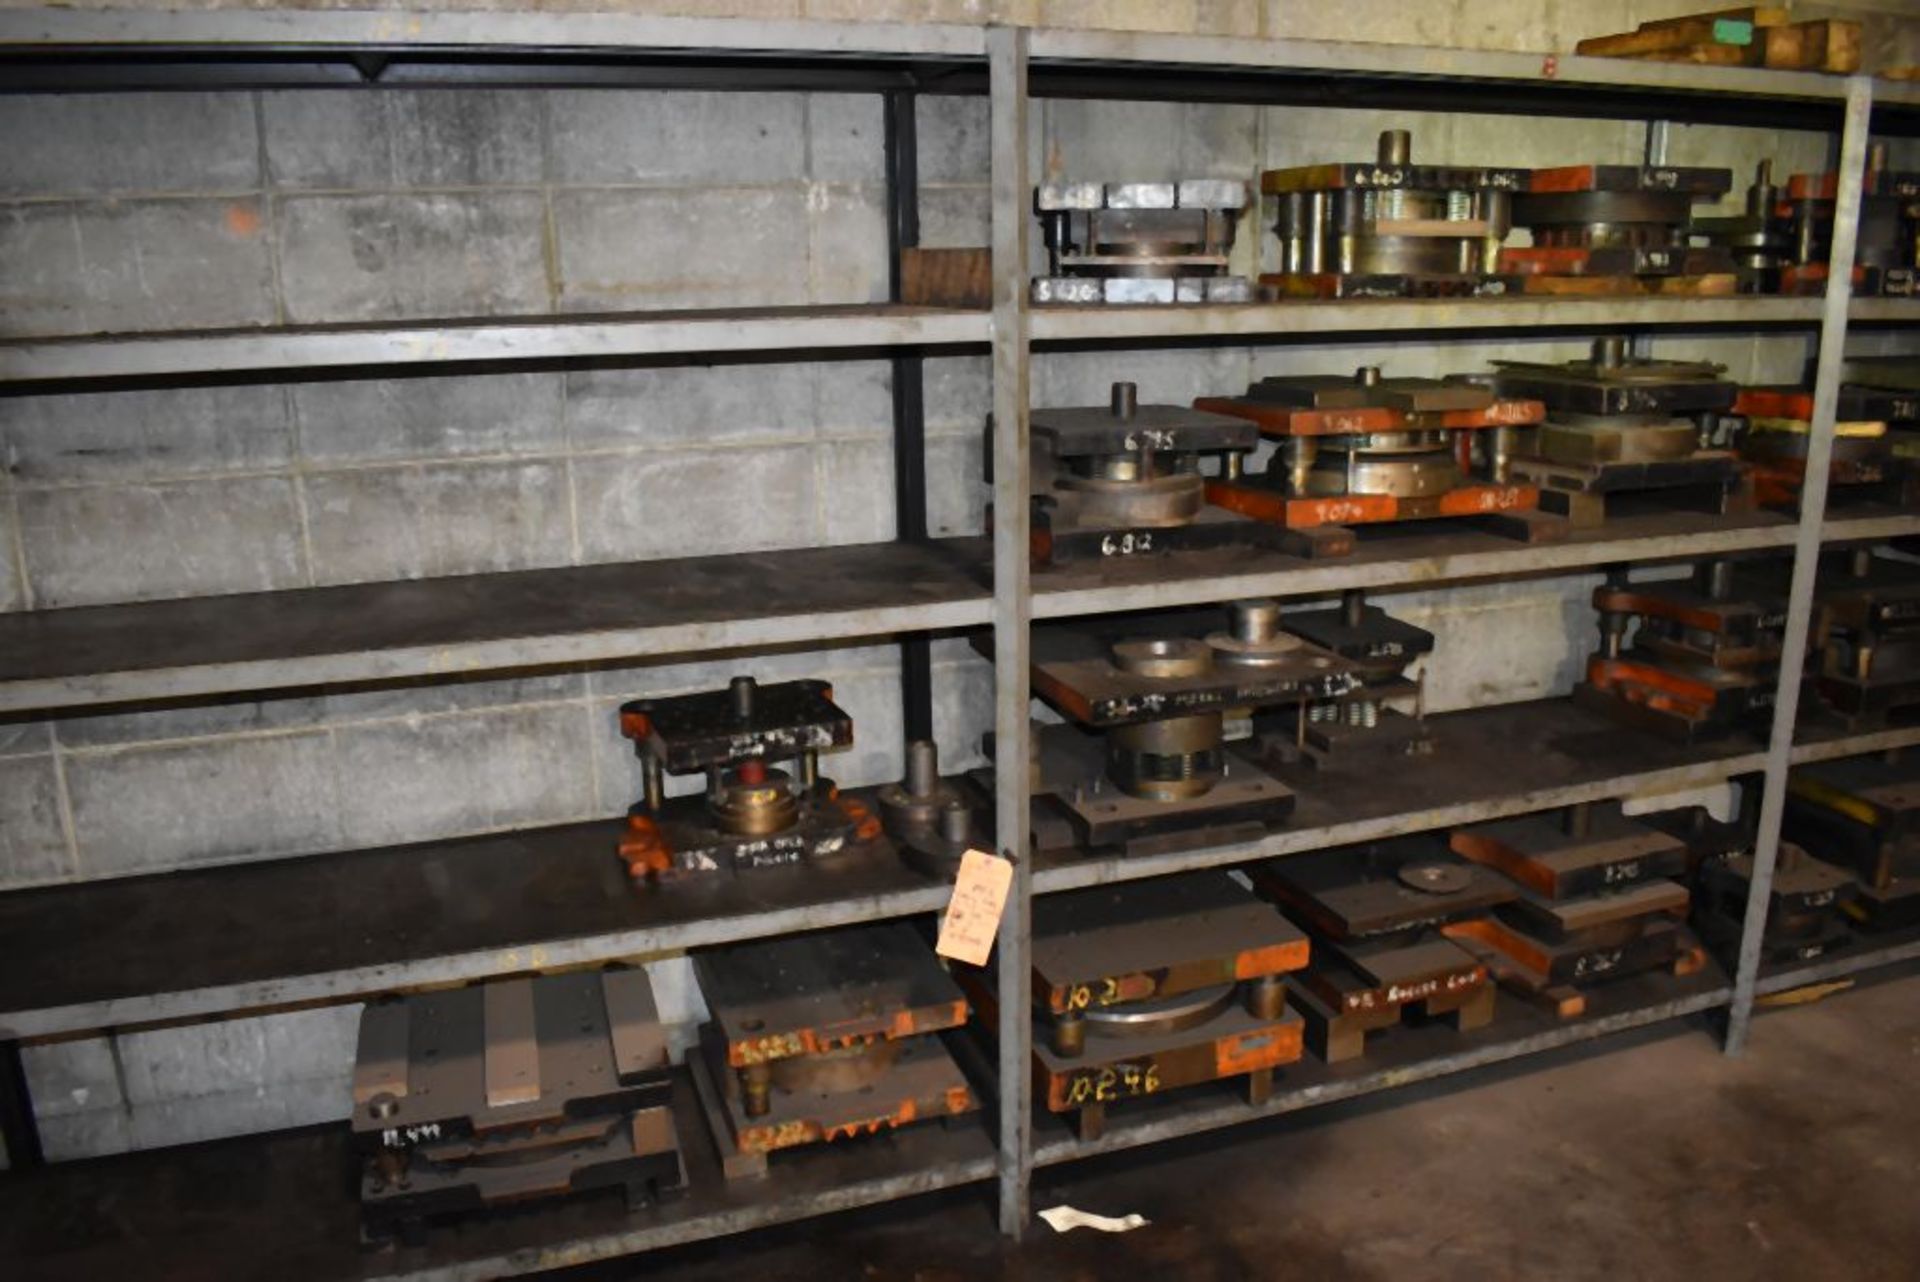 HEAVY DUTY WELDED STEEL SHELVING UNIT, THREE TIER, WITH CONTENTS - 20' LONG x 18"D x 72"H - Image 3 of 4